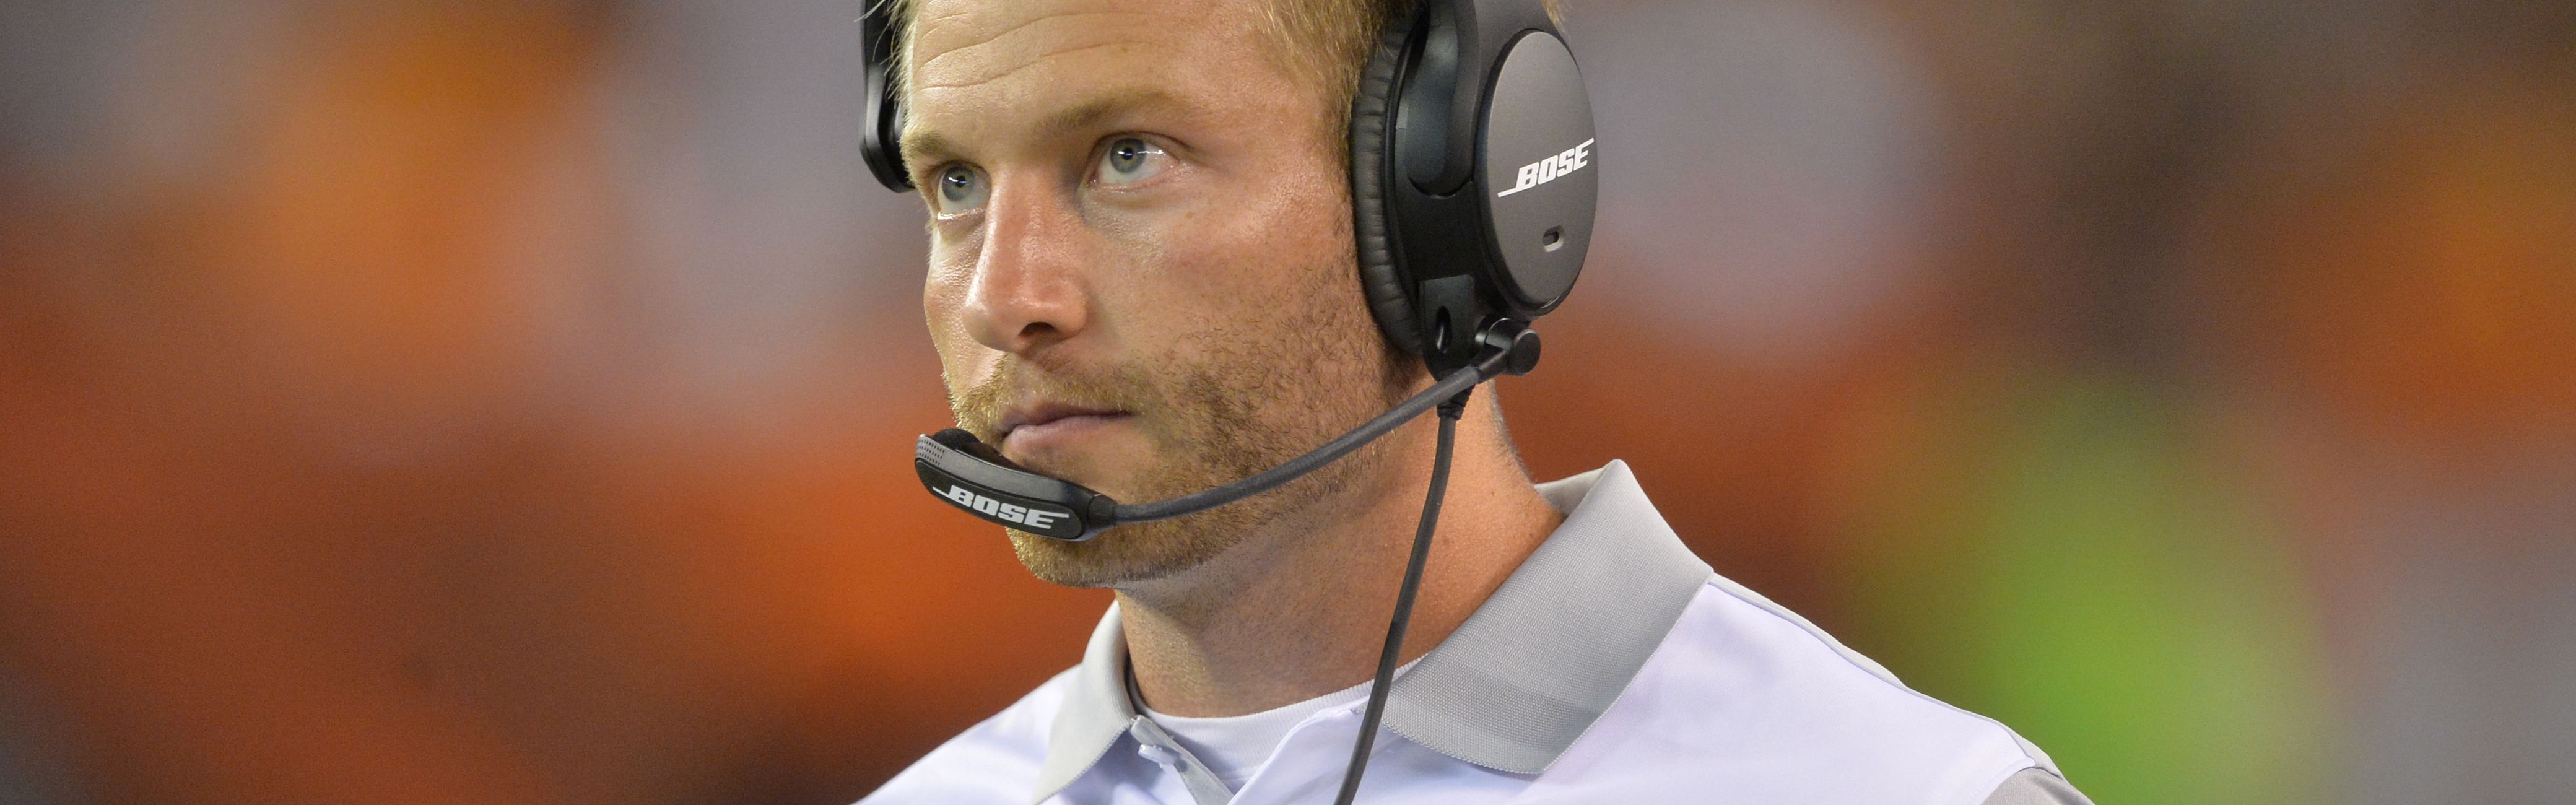 Sean McVay: The youngest head coach in NFL history | CNN